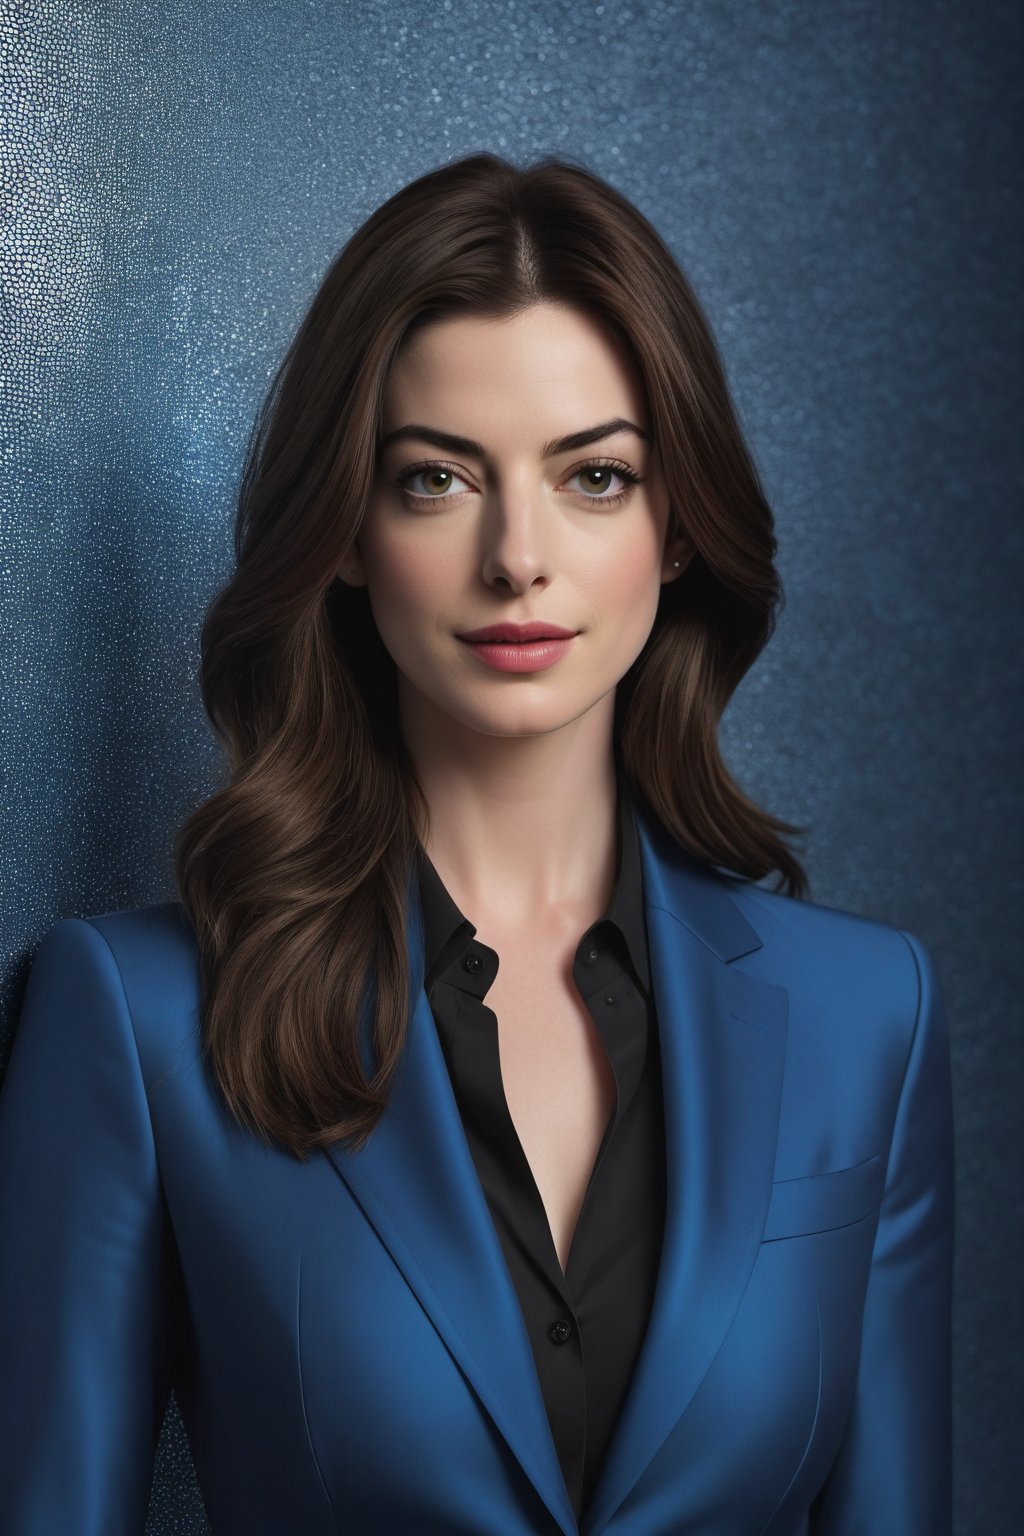 Create a hyper-realistic vertical photo mosaic of Anne Hathaway styled as the most attractive Indian woman in her 30s. She should have a trendy wolf cut with brown hair, and be portrayed as a trendsetter. The image should be a highly detailed, formal portrait, showcasing her determined expression in a blue business suit. Ensure perfect symmetric eyes and natural skin texture. Emphasize hyperrealism with soft light, sharp focus, high contrast, and cinematic lighting. The image should be of high quality, captured in 8k HDR with a DSLR, featuring film grain akin to a Fujifilm XT3. It should be trending on ArtStation, embodying modern, sleek digital art.